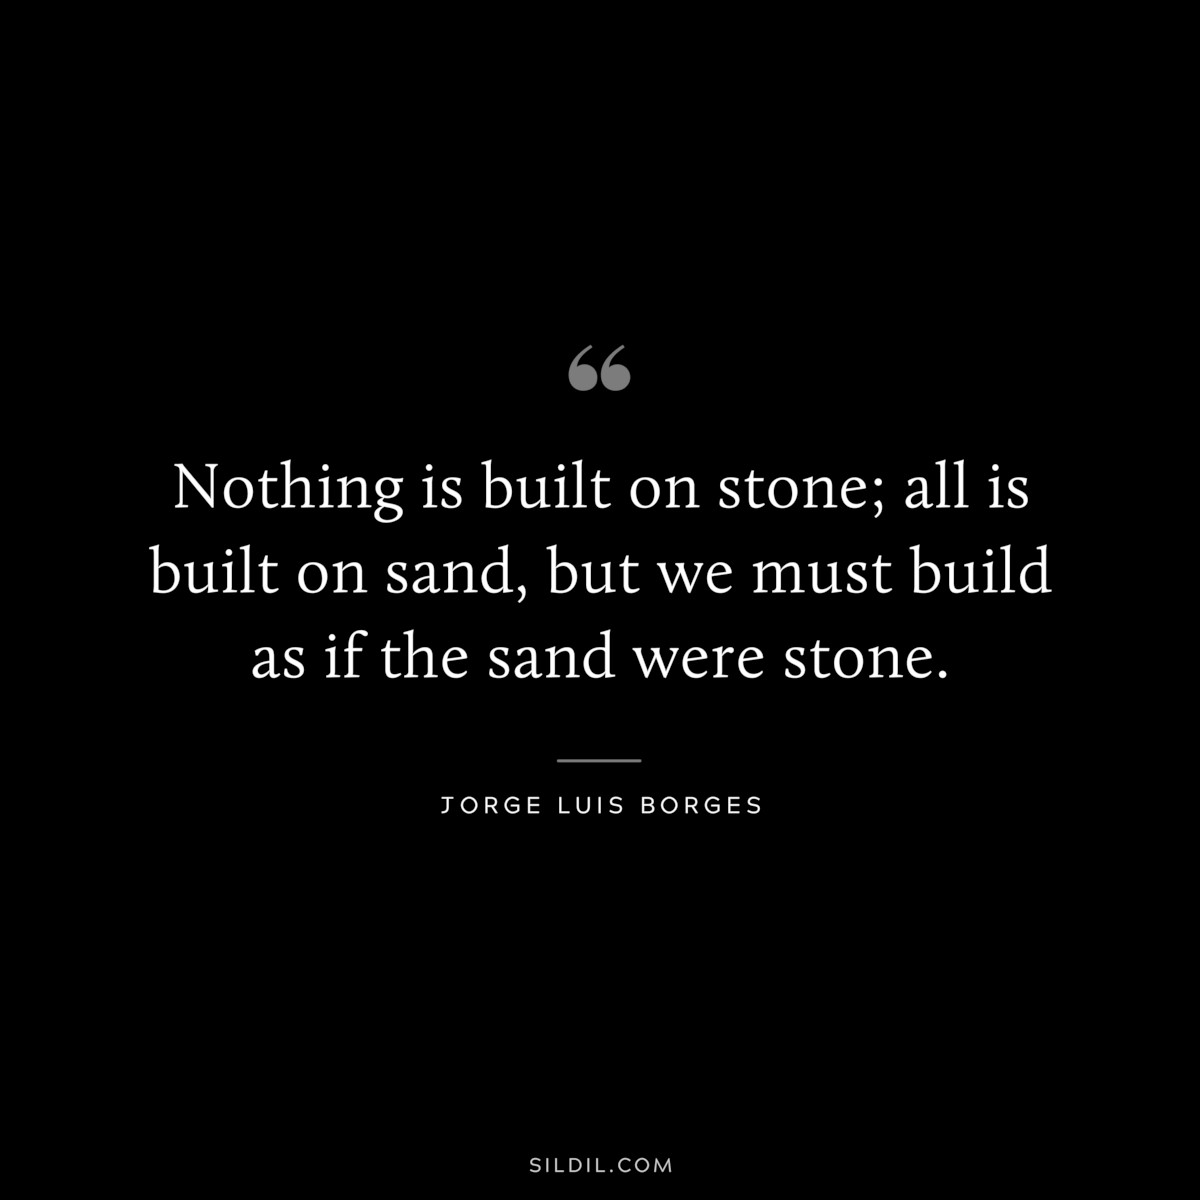 Nothing is built on stone; all is built on sand, but we must build as if the sand were stone. ― Jorge Luis Borges